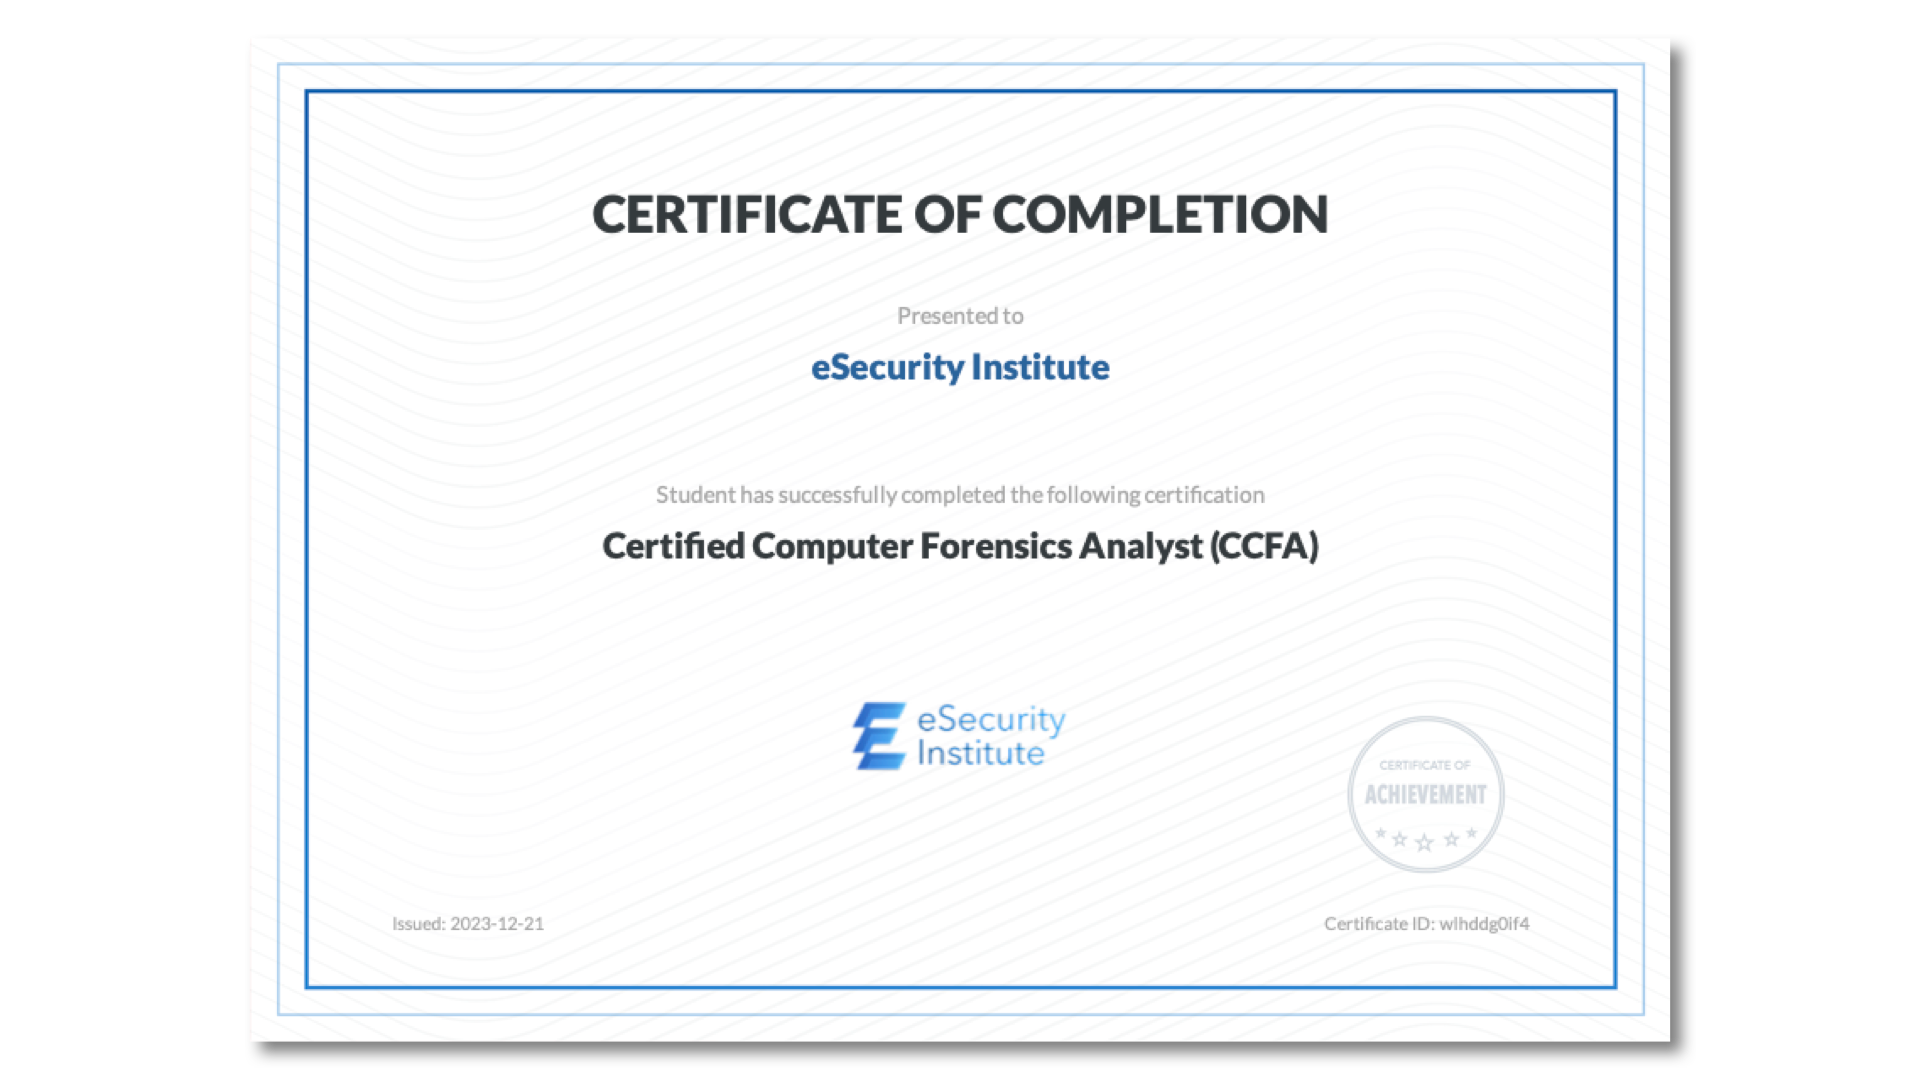 Certified Computer Forensics Analyst (CCFA)